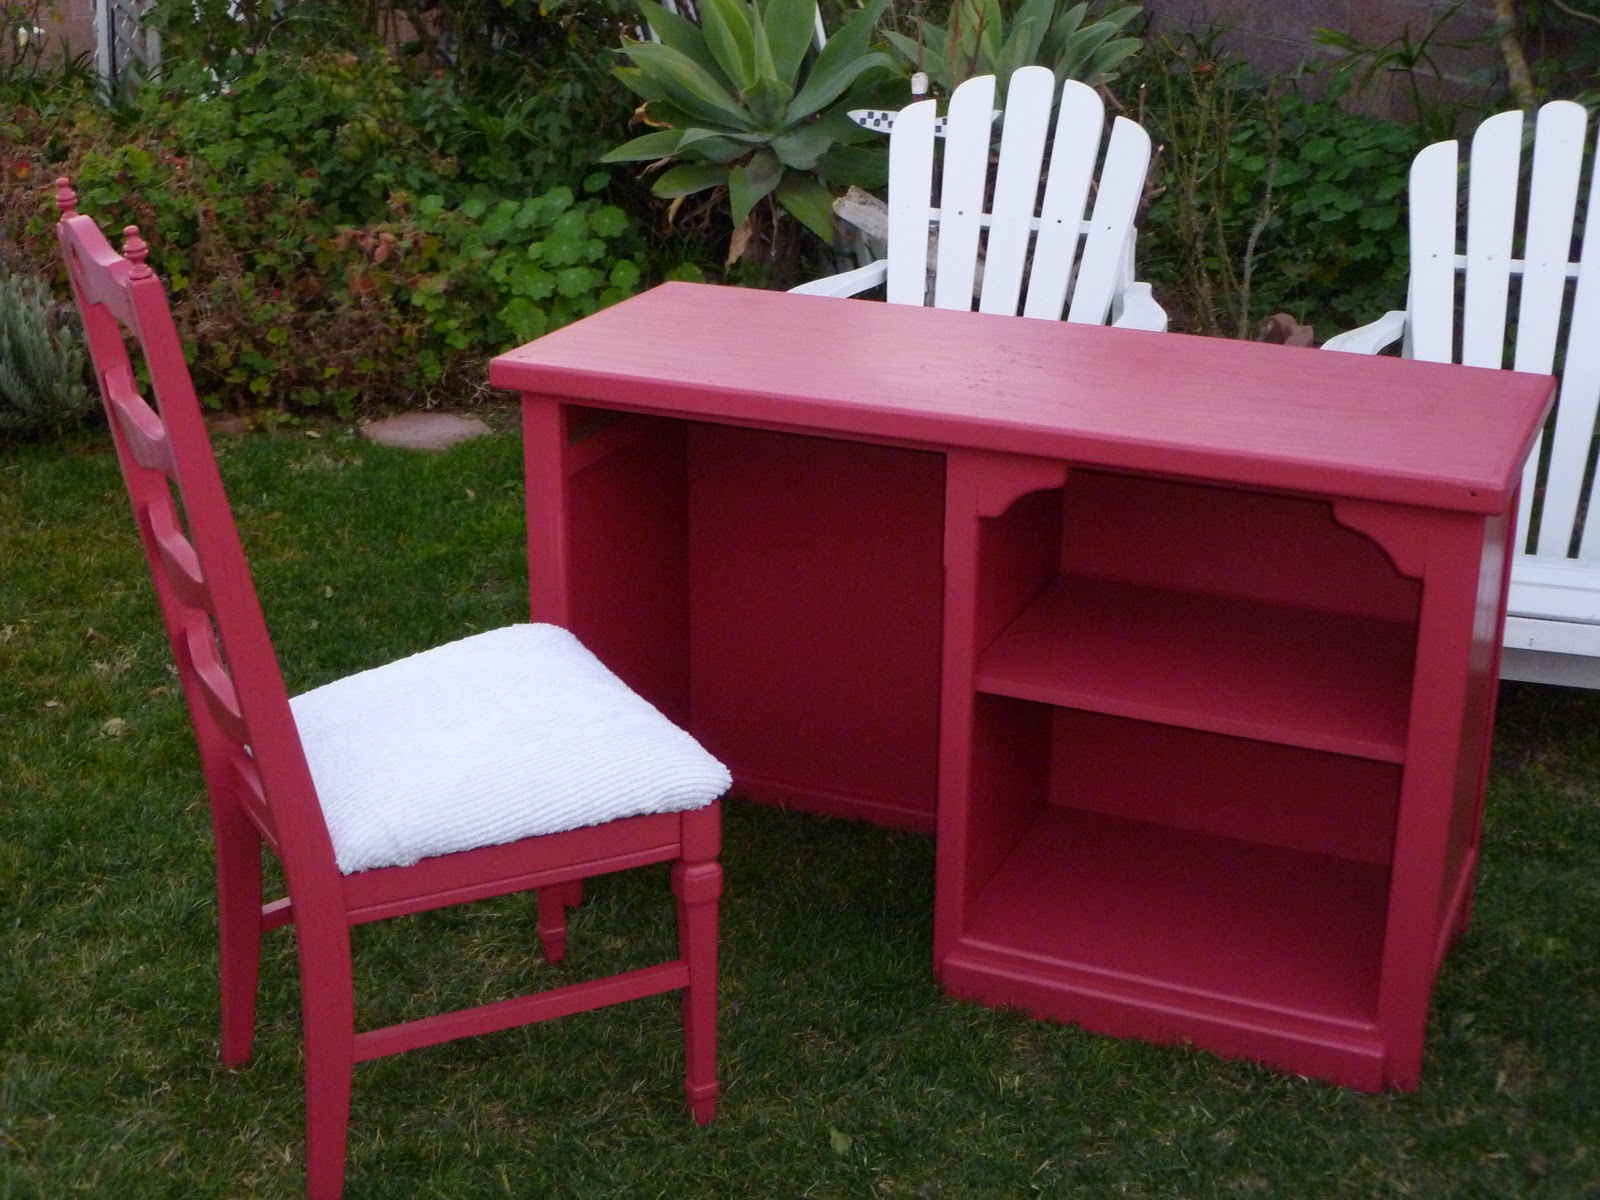 Shabby To Chic Treasures: ~~Pink Desk and Chair Awesome